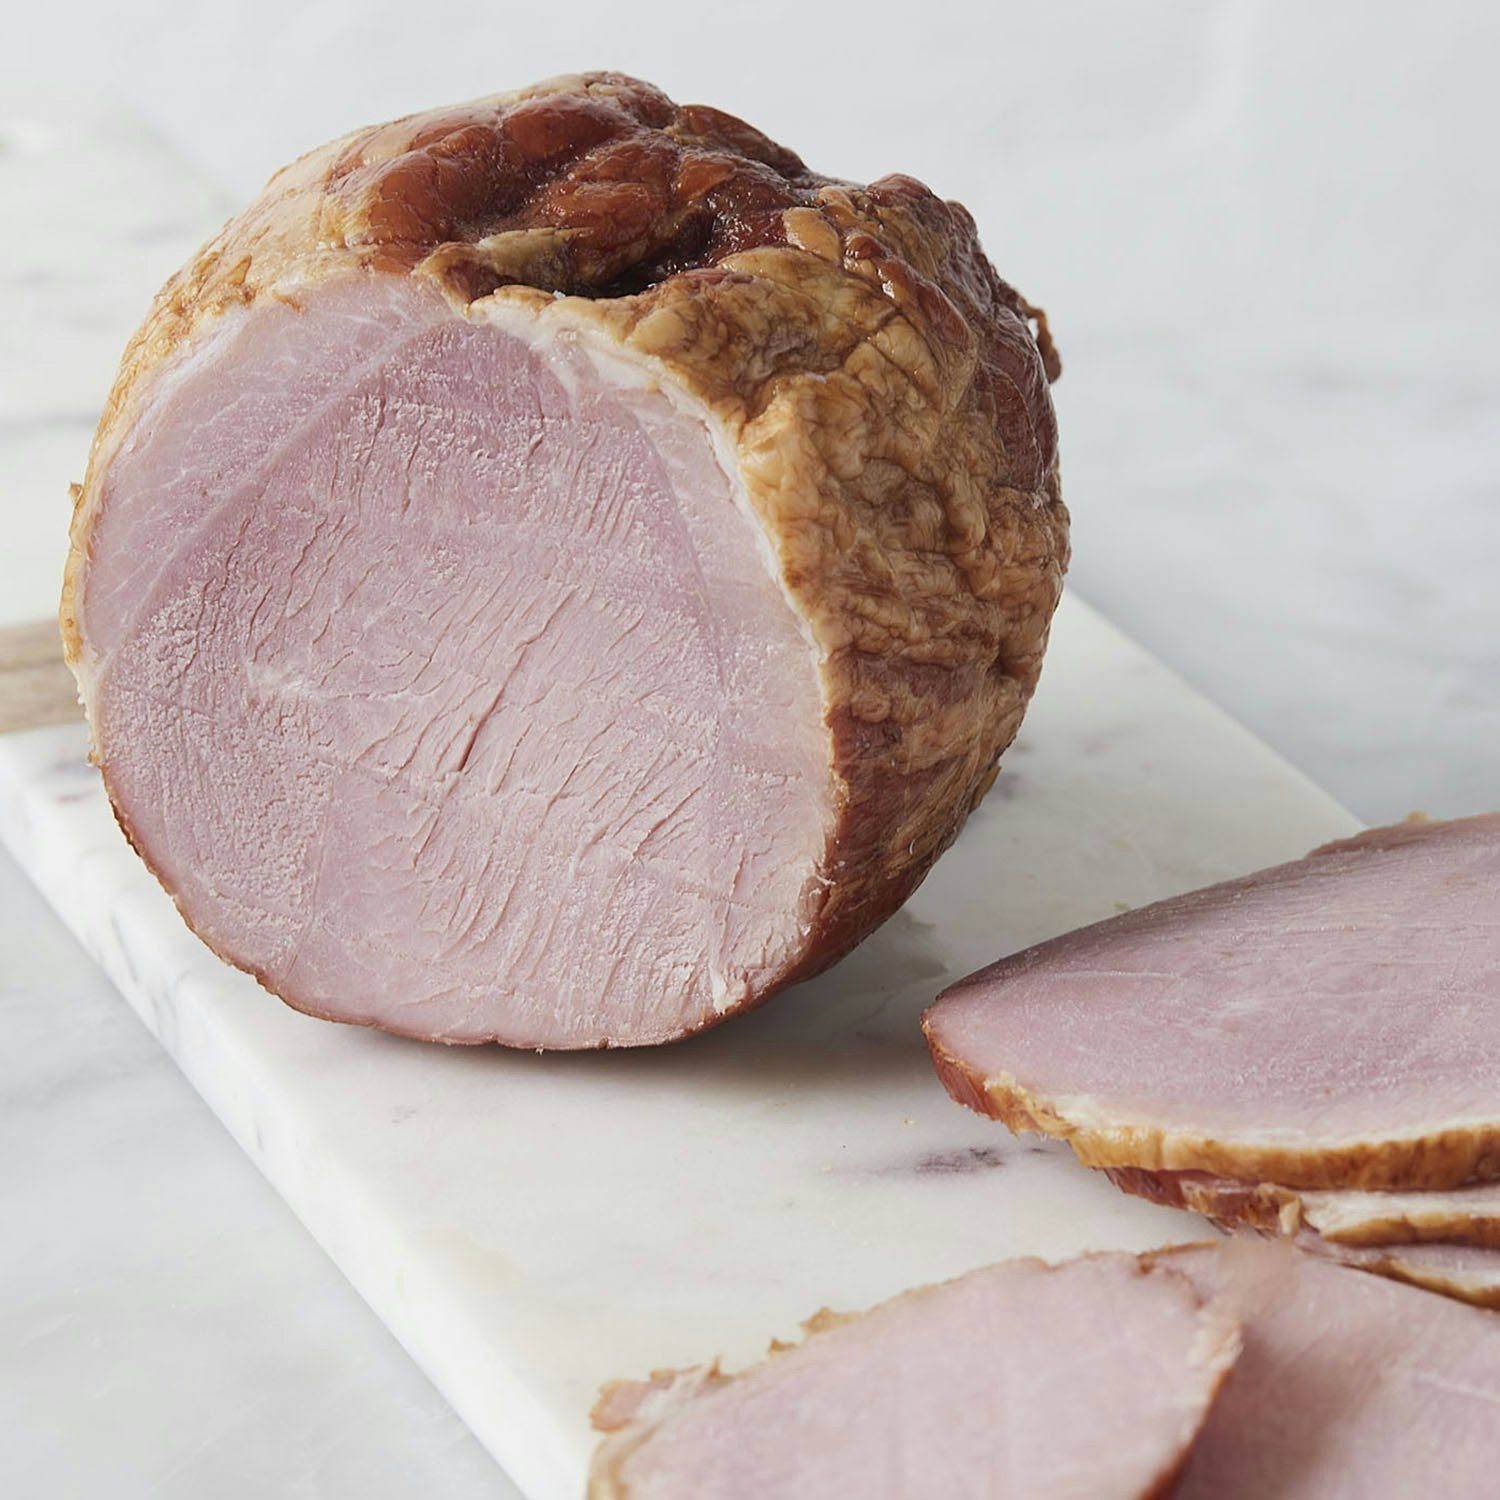 Olympia Provisions Sweetheart Ham meats